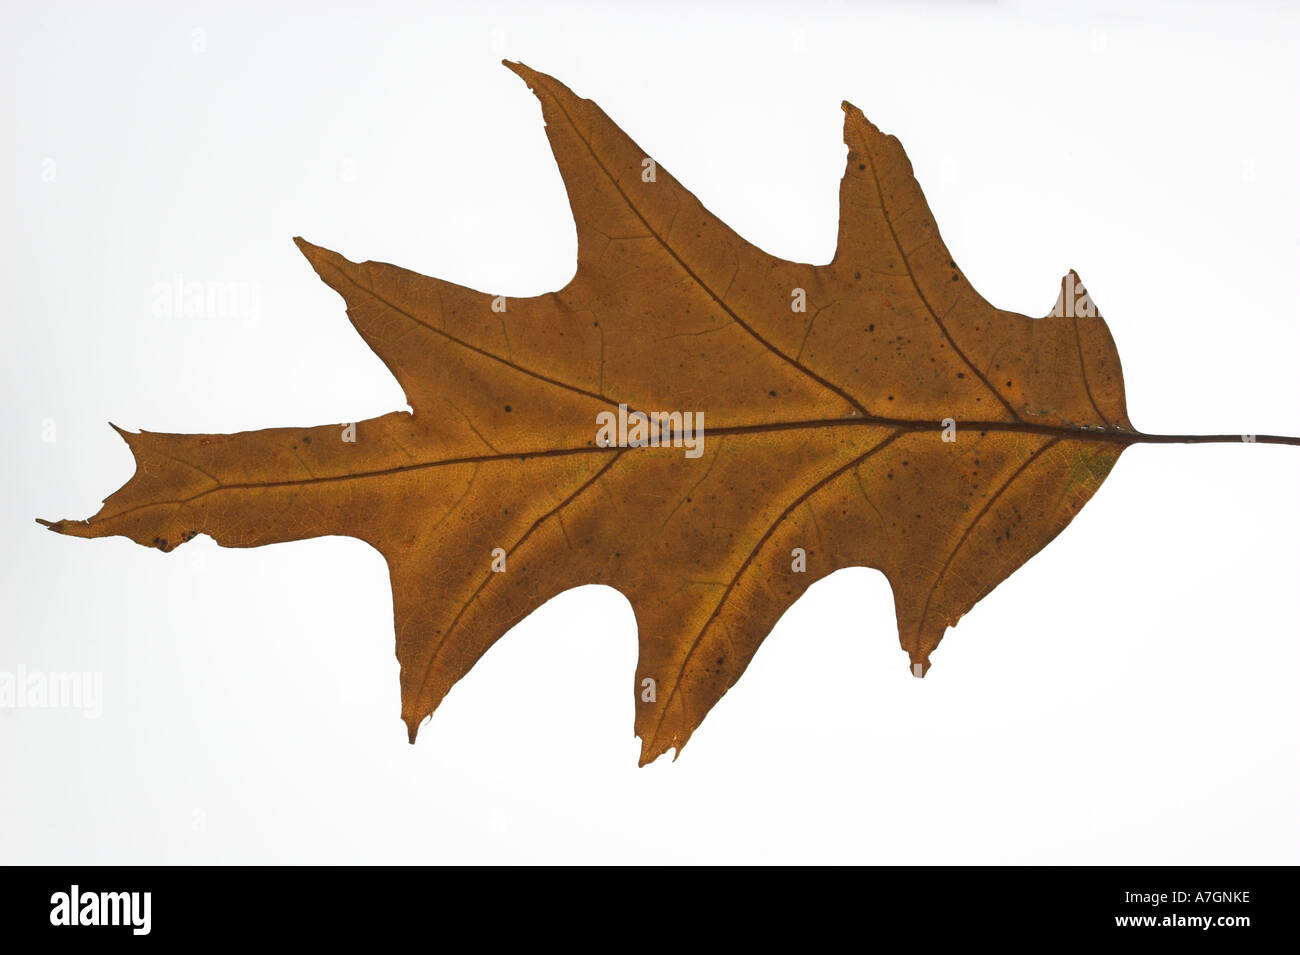 RED OAK brown leaf against a white background Quercus rubra Stock Photo